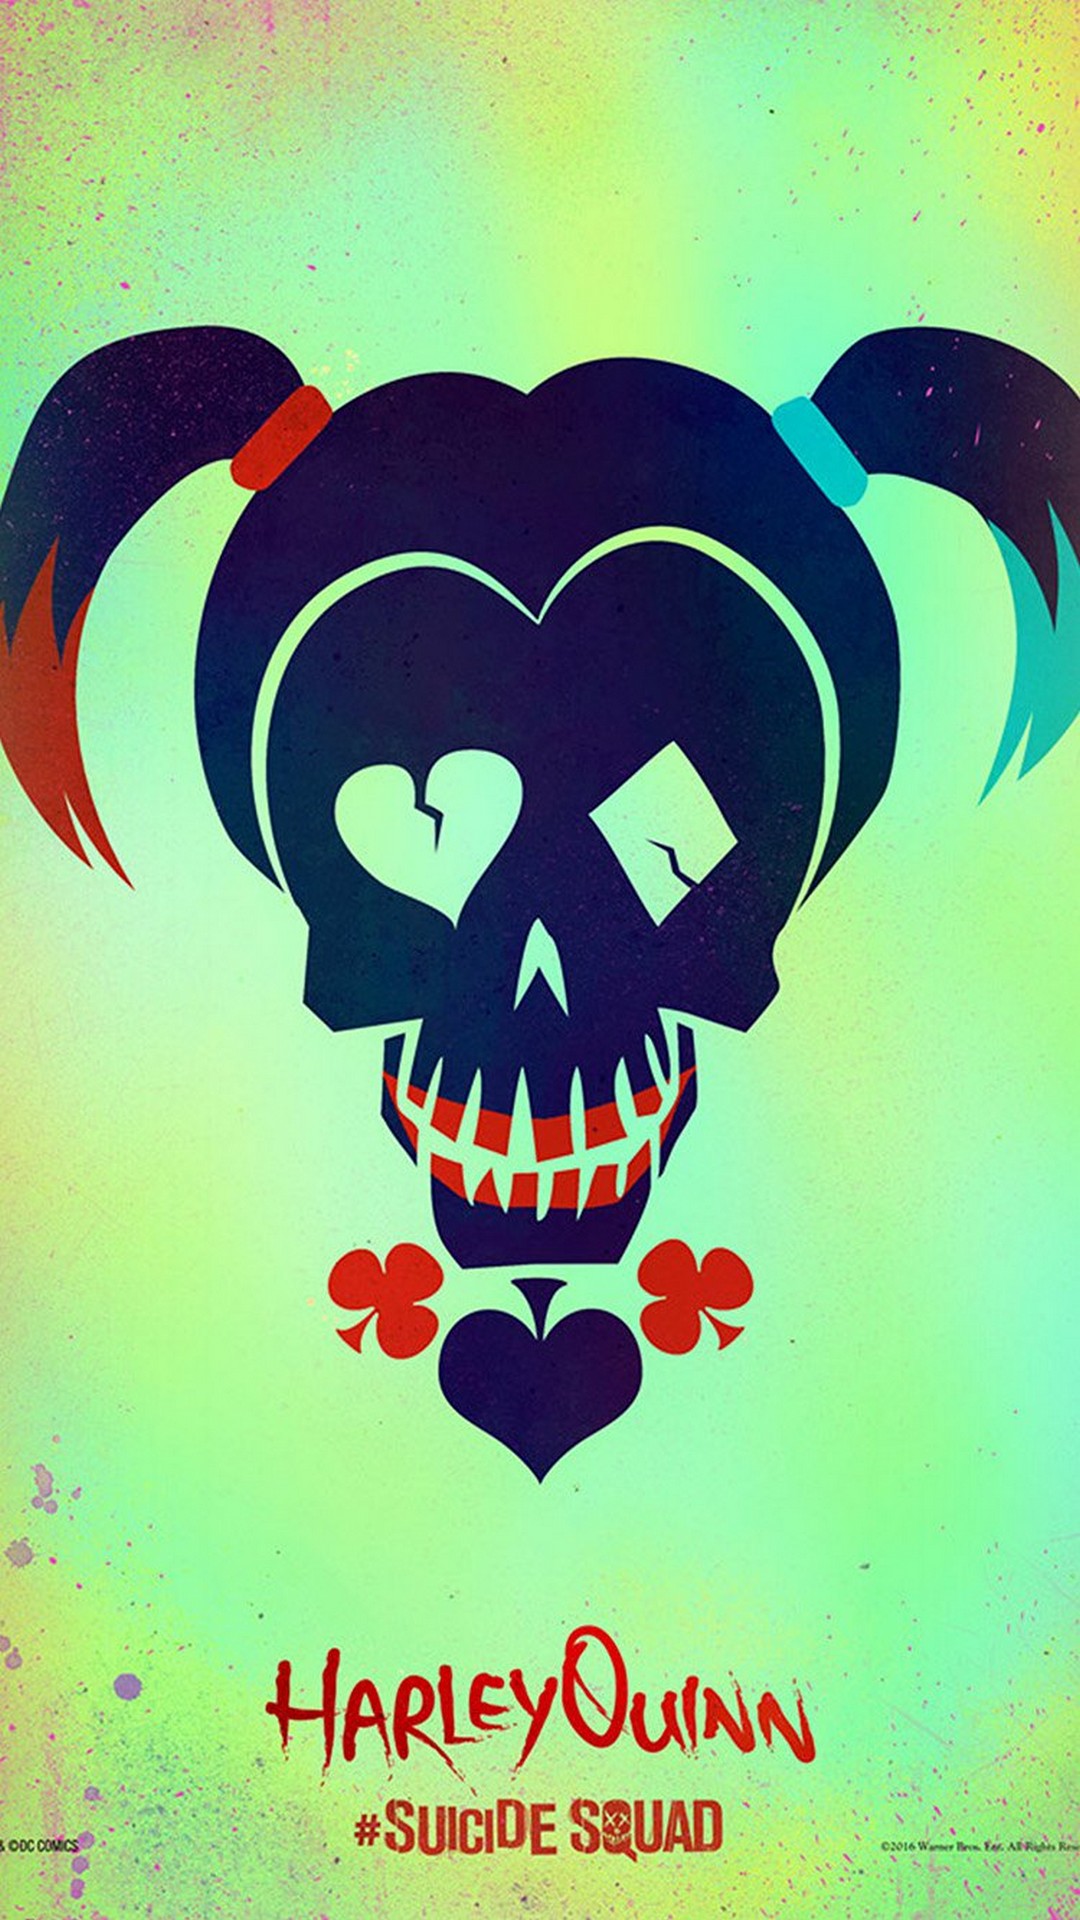 Harley Quinn Movie Wallpaper For iPhone with image resolution 1080x1920 pixel. You can make this wallpaper for your iPhone 5, 6, 7, 8, X backgrounds, Mobile Screensaver, or iPad Lock Screen